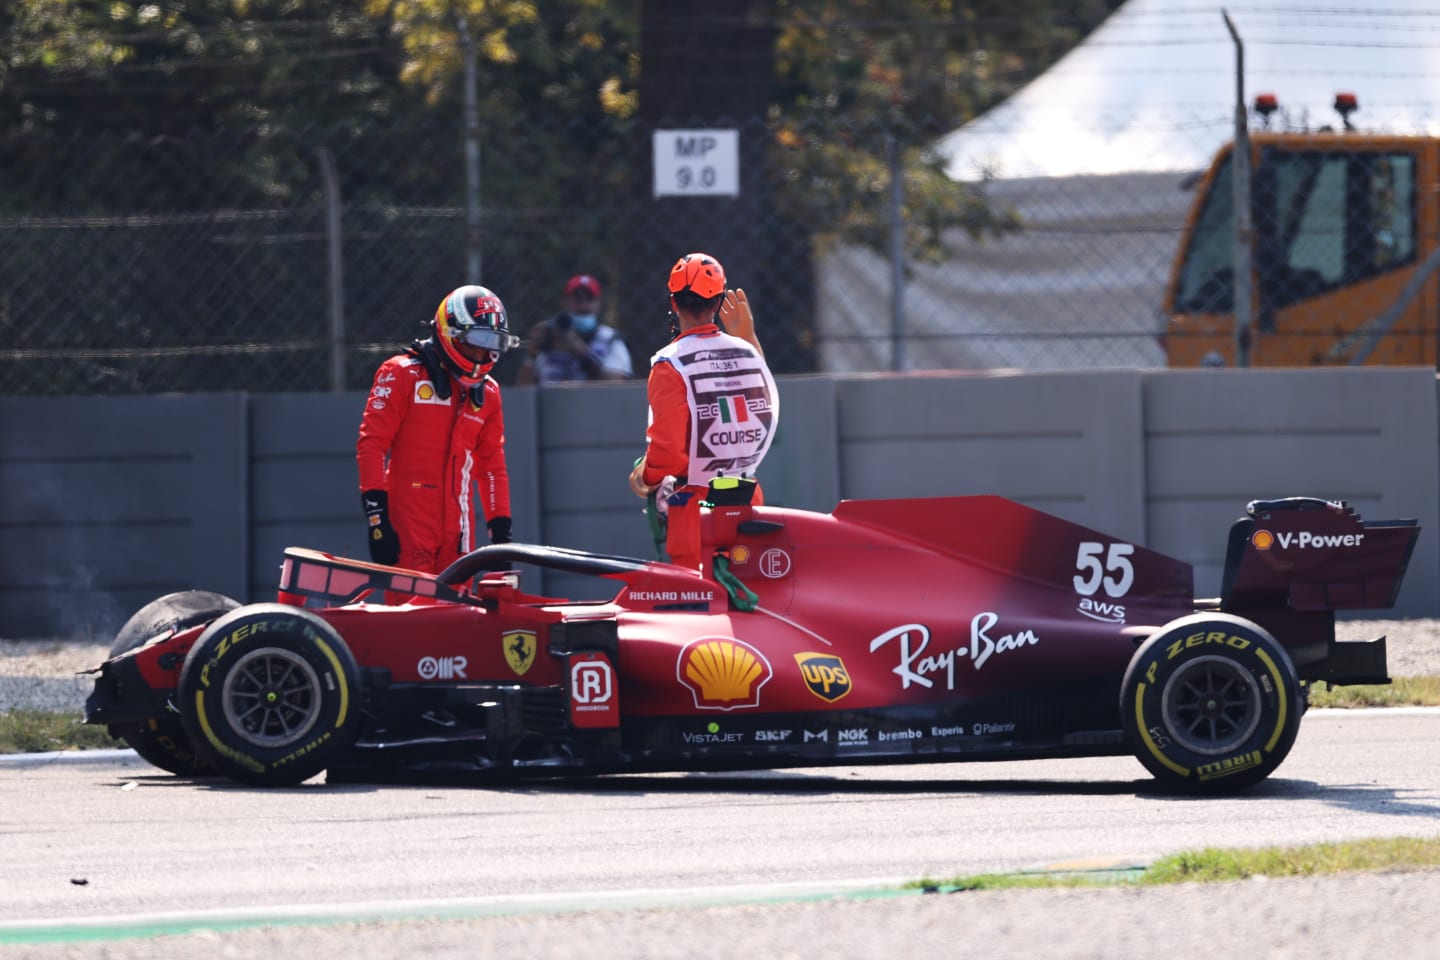 MONZA, ITALY - SEPTEMBER 11: Carlos Sainz of Spain and Ferrari looks on after a crash during practice ahead of the F1 Grand Prix of Italy at Autodromo di Monza on September 11, 2021 in Monza, Italy. (Photo by Lars Baron/Getty Images)